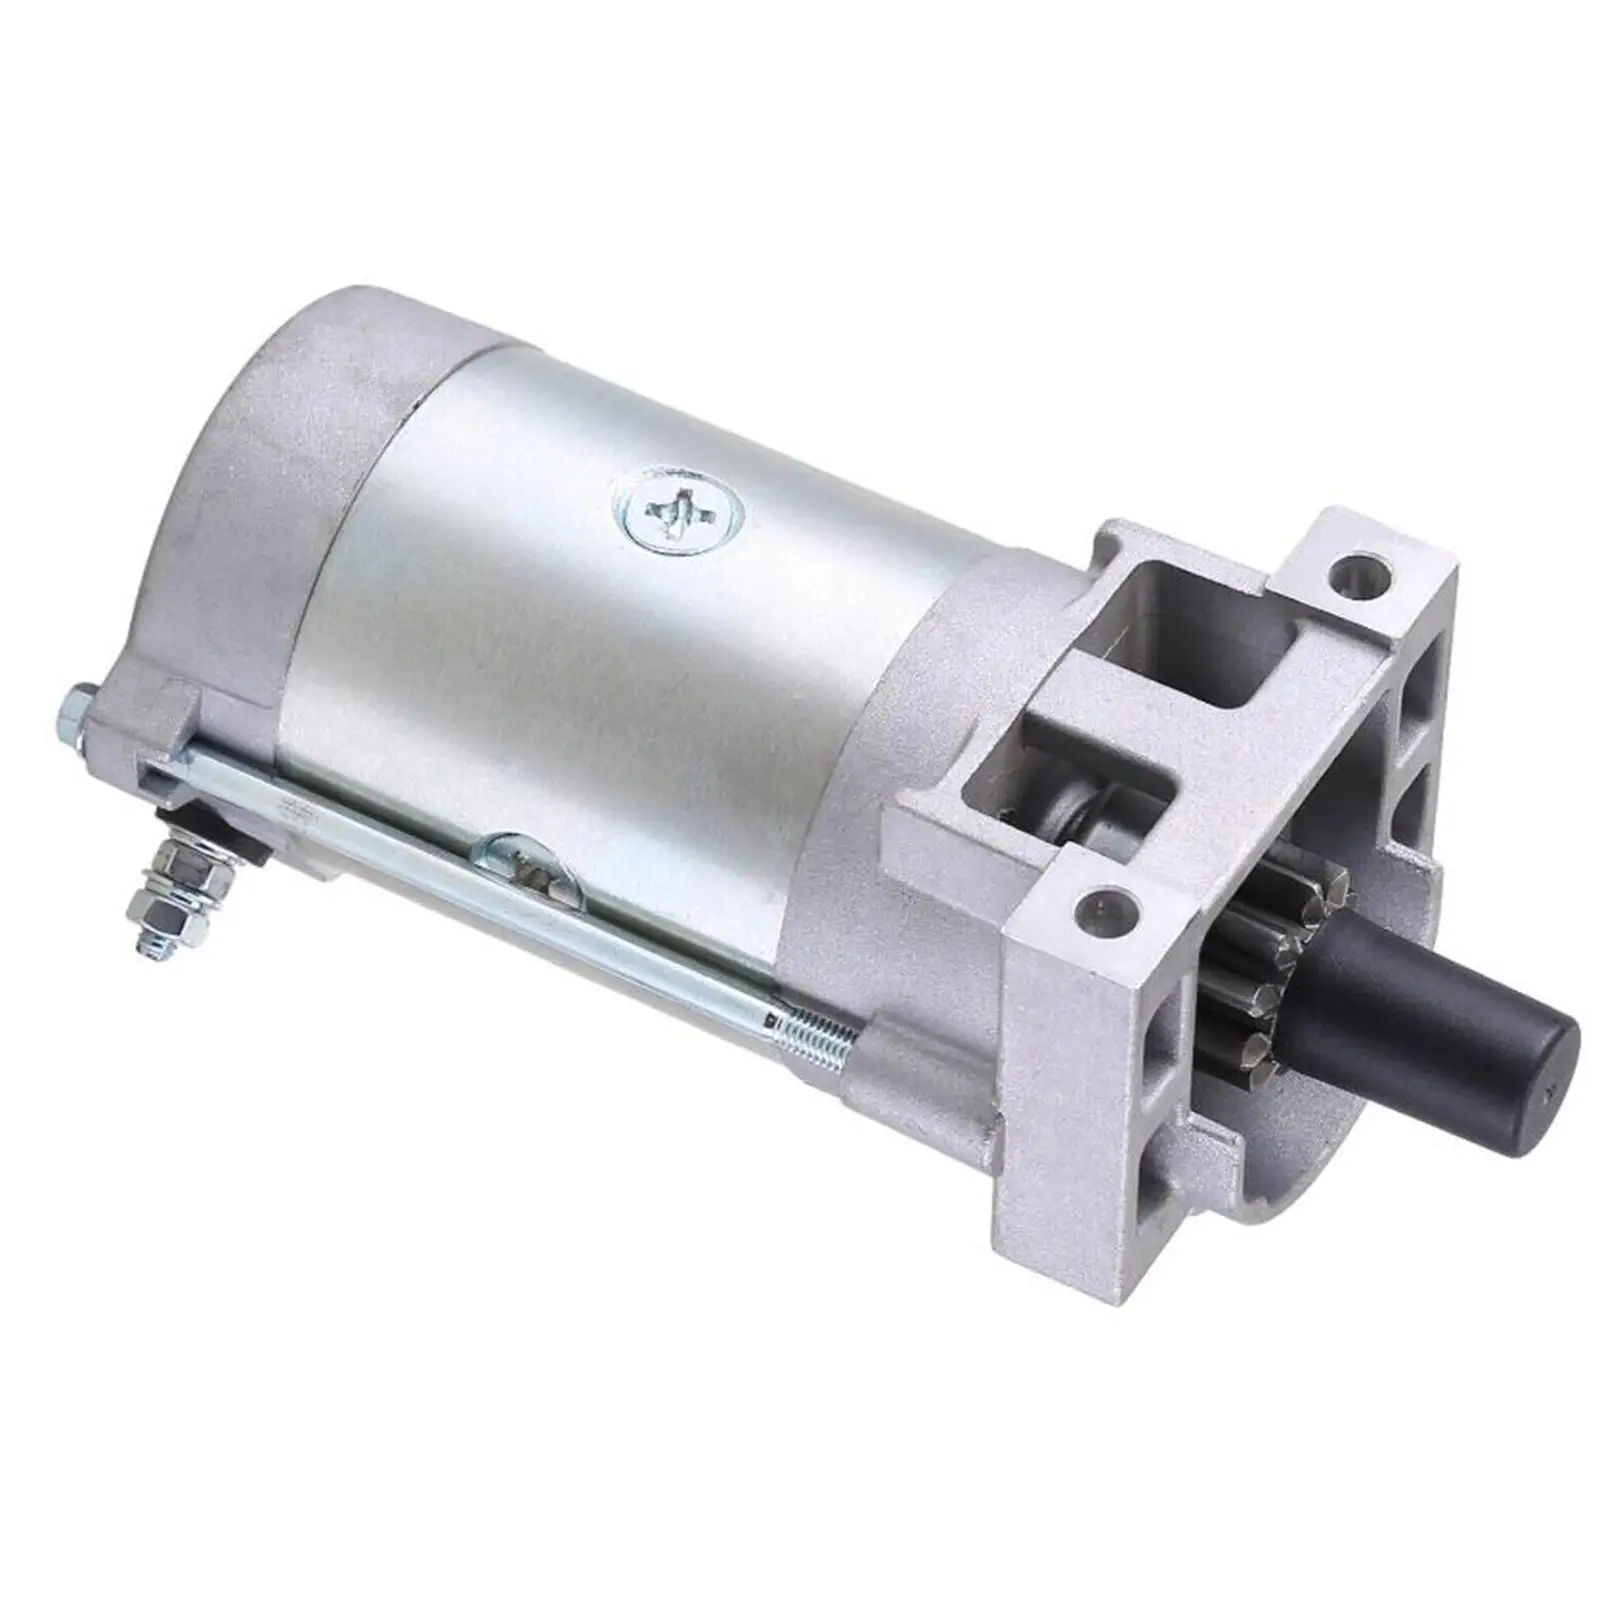 Starter Motor Replaces Accessories Spare Parts Easy to Install Durable Motors Starter Parts 127-9209 133-1564 133-9828 136-7880